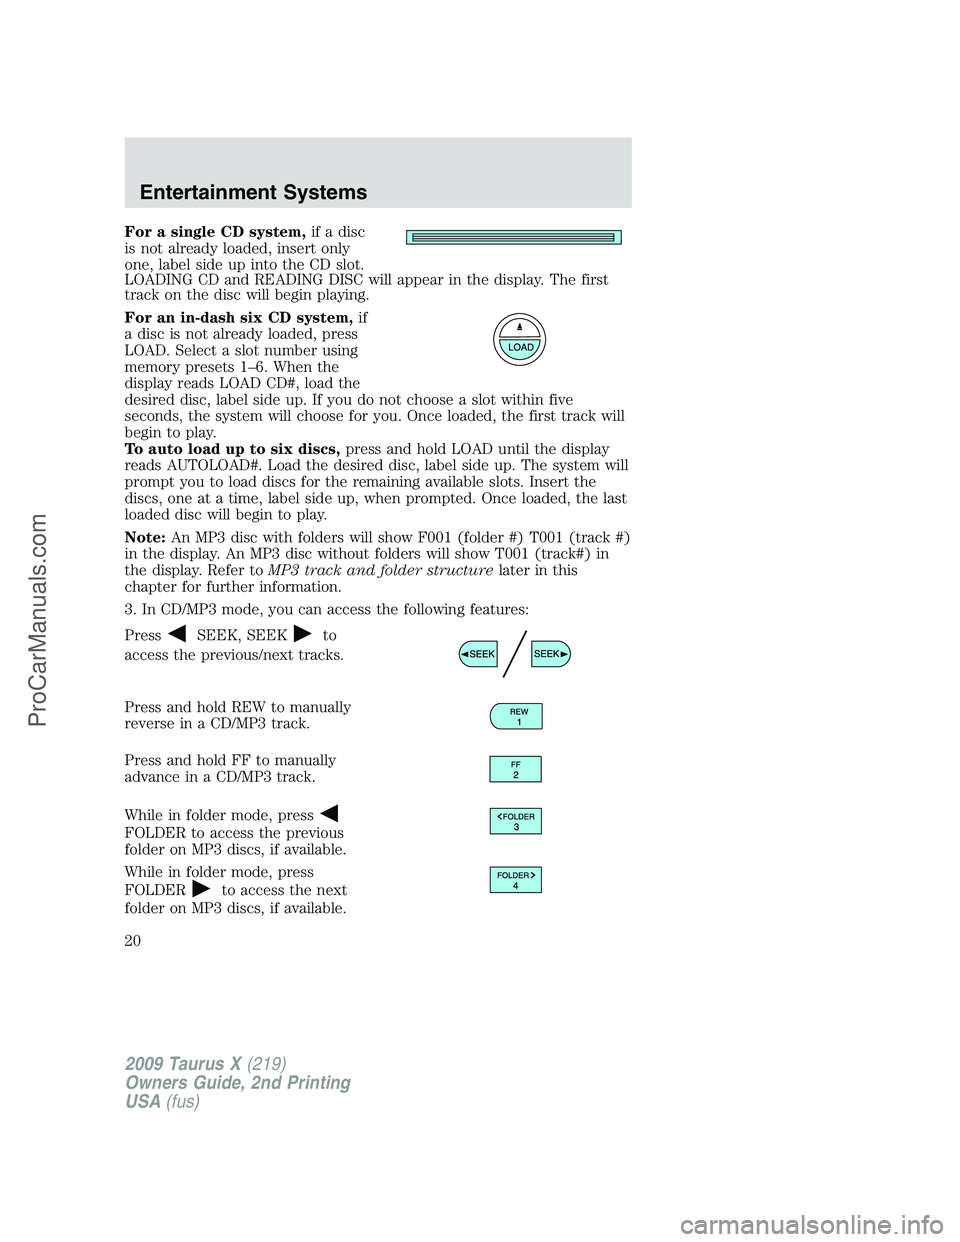 FORD FREESTYLE 2009 User Guide For a single CD system,if a disc
is not already loaded, insert only
one, label side up into the CD slot.
LOADING CD and READING DISC will appear in the display. The first
track on the disc will begin 